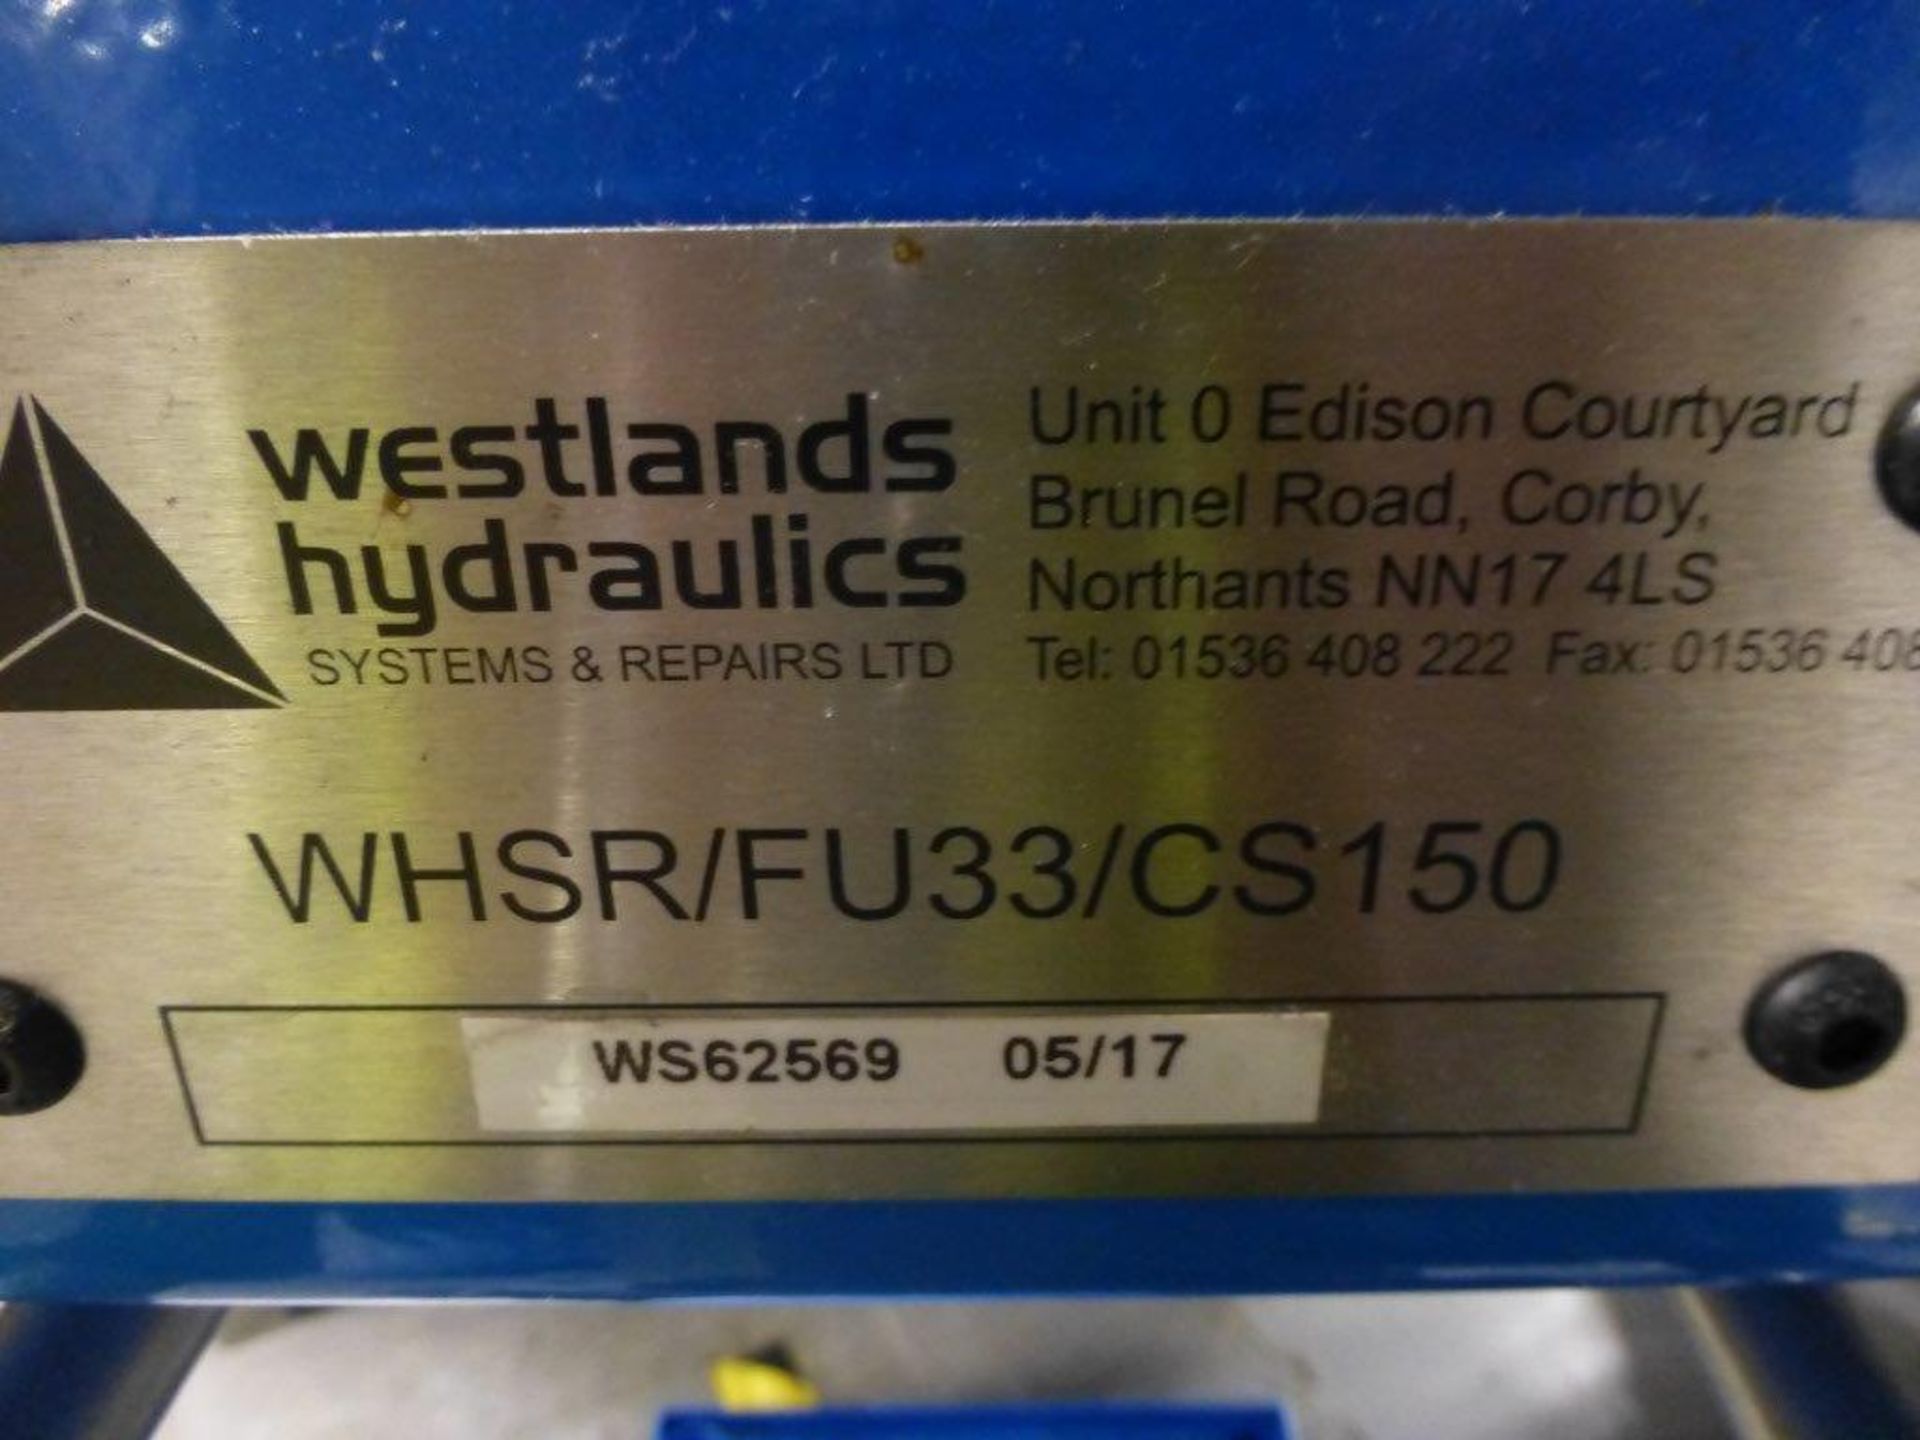 Westlands Hydraulics WHSR/FU33/CS150 mobile oil filtration unit, serial No WS62569 (2017) - Image 2 of 2